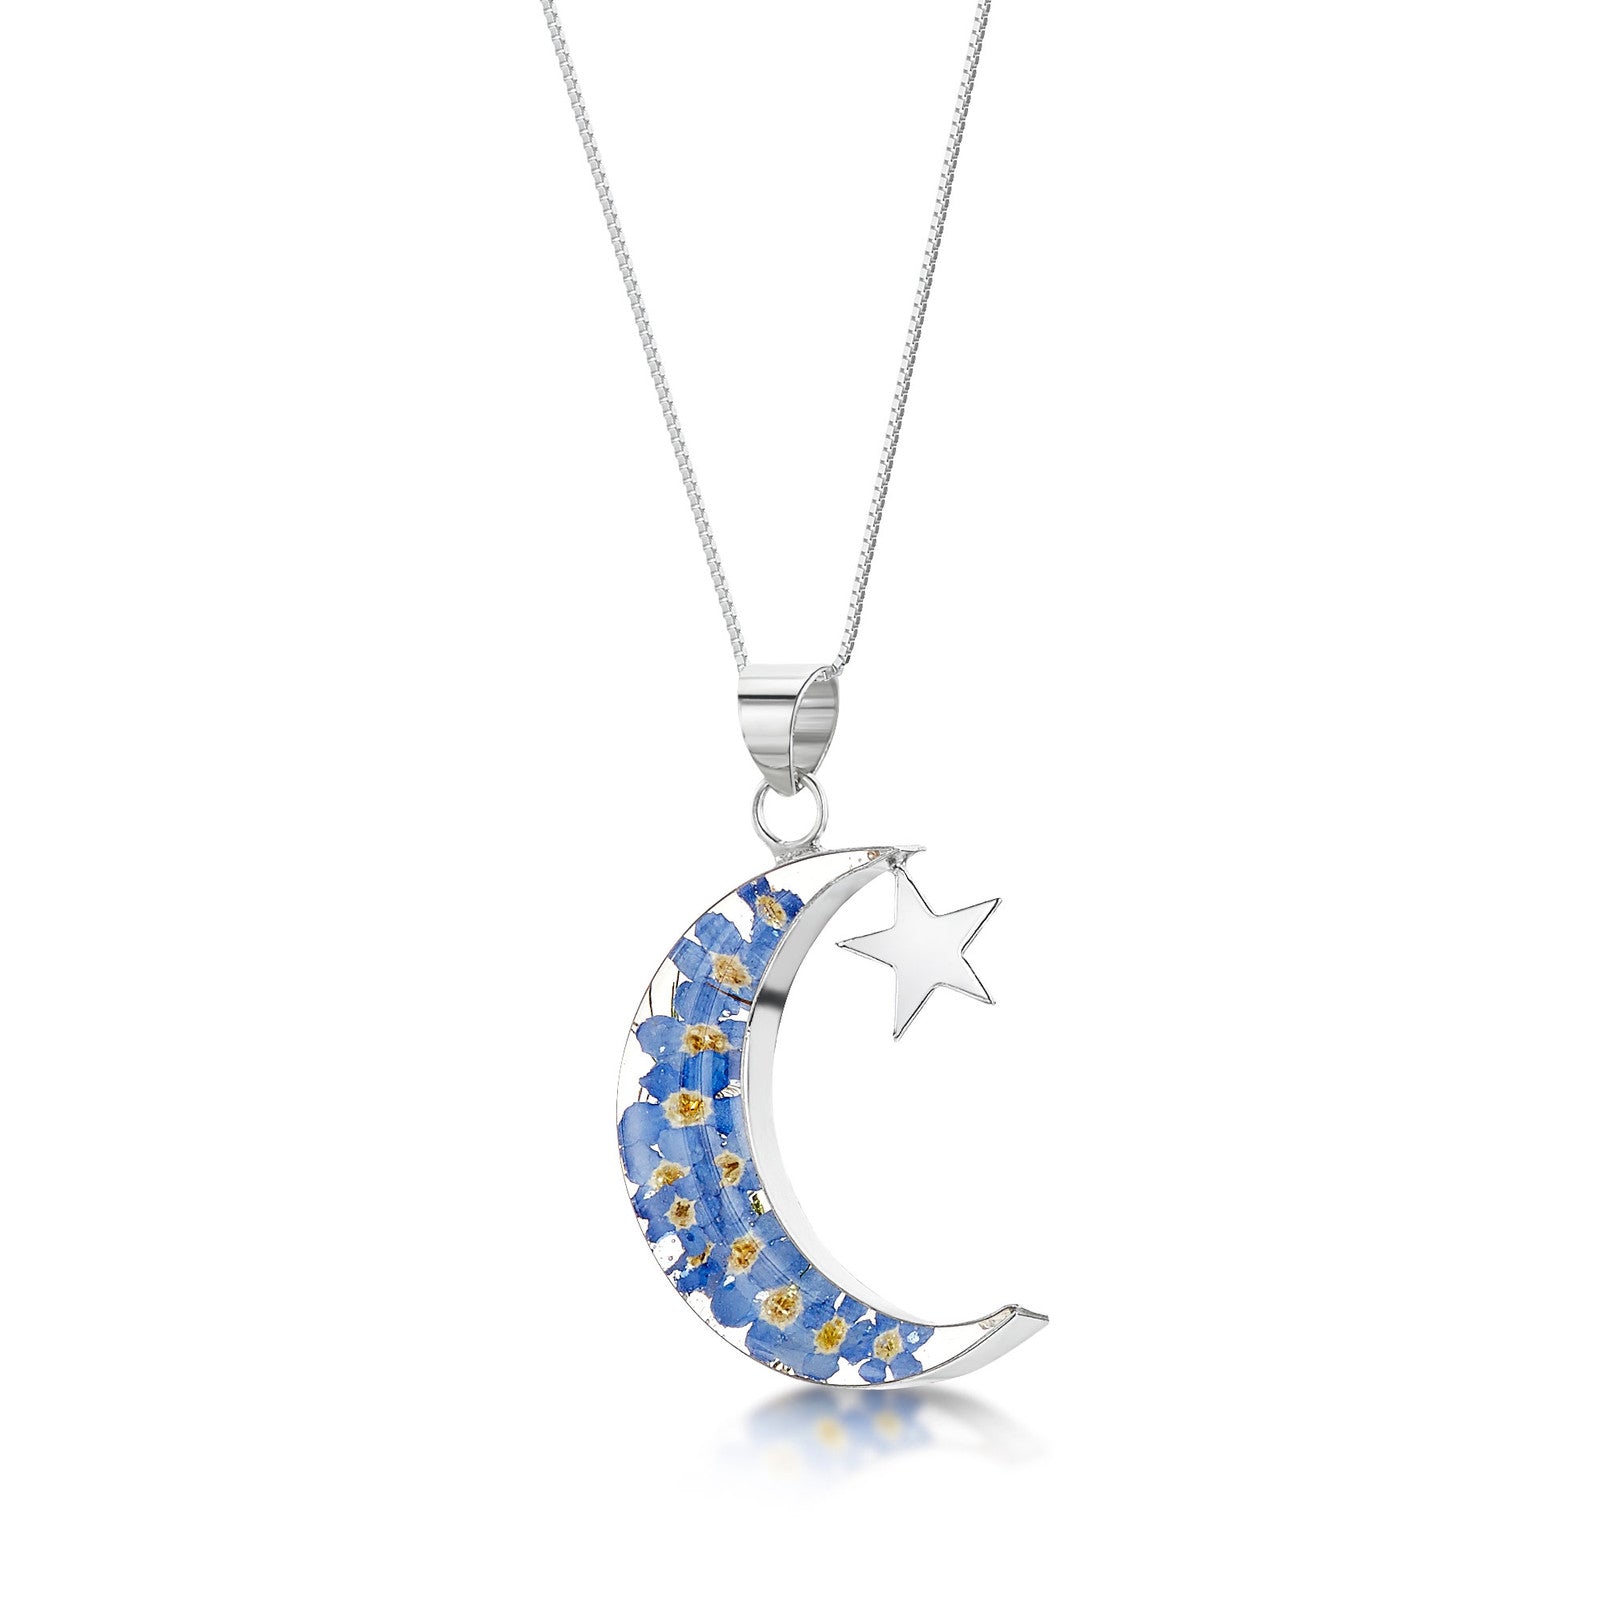 Sterling Silver Necklace - Forget me not - Moon and Star